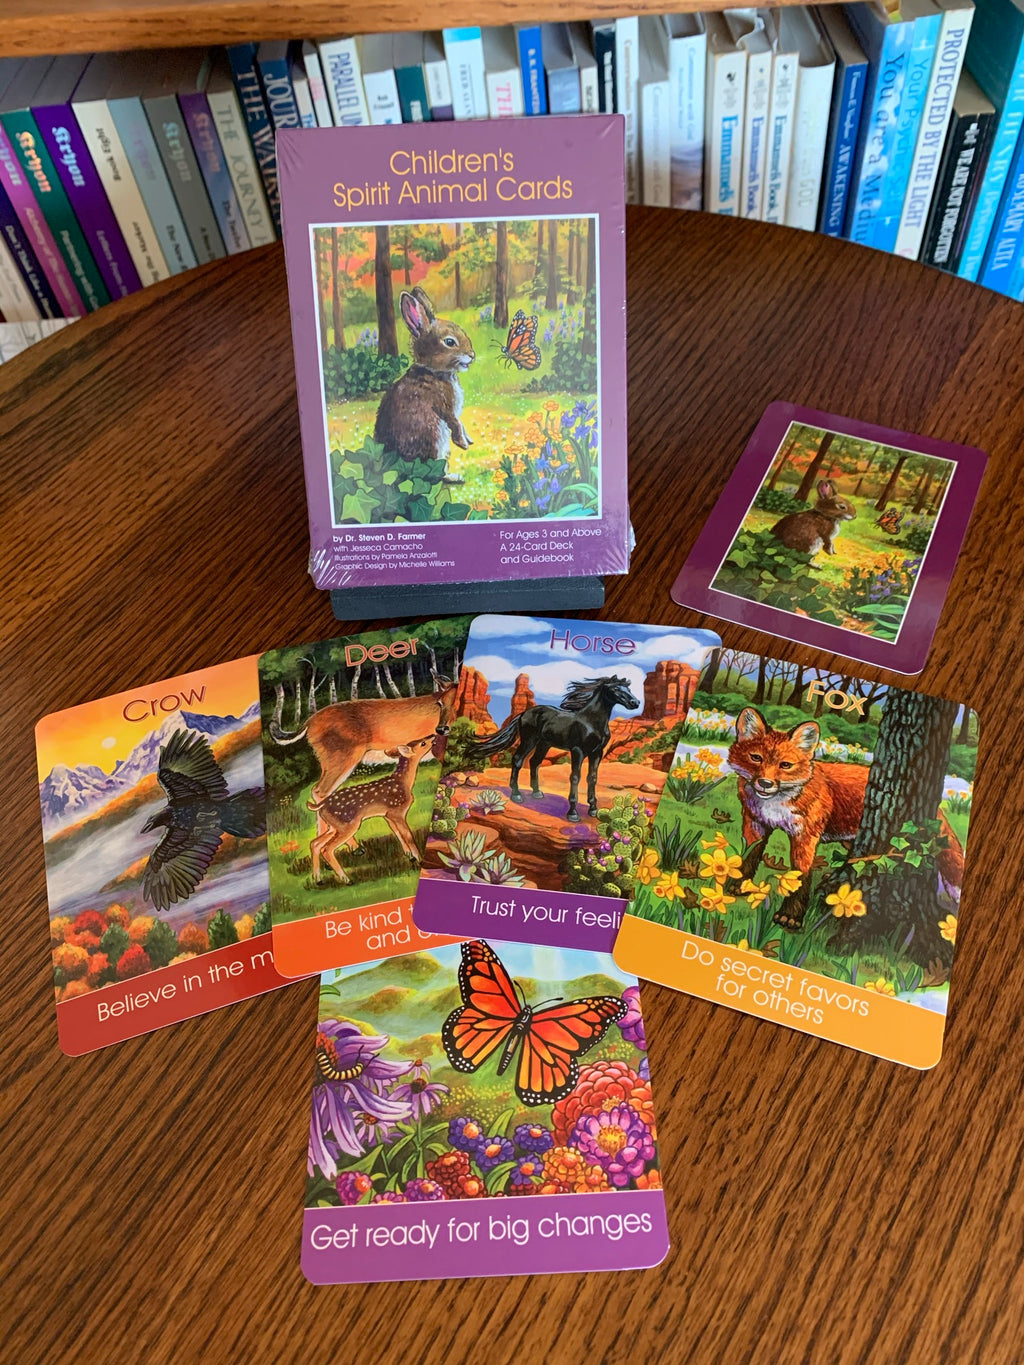 Children's Spirit Animal Cards, with their colorful and inspiring illustrations give children the chance to choose cards and gain insights without the complexities of adult oracle cards.  It also opens children up to the idea of spirit animals and the powerful messages they bring  with simple words or phrases and artwork that they will love. Set consists of 24 oracle cards, guidebook (with guidance for parents) and a box for storage. Cost is $15.99